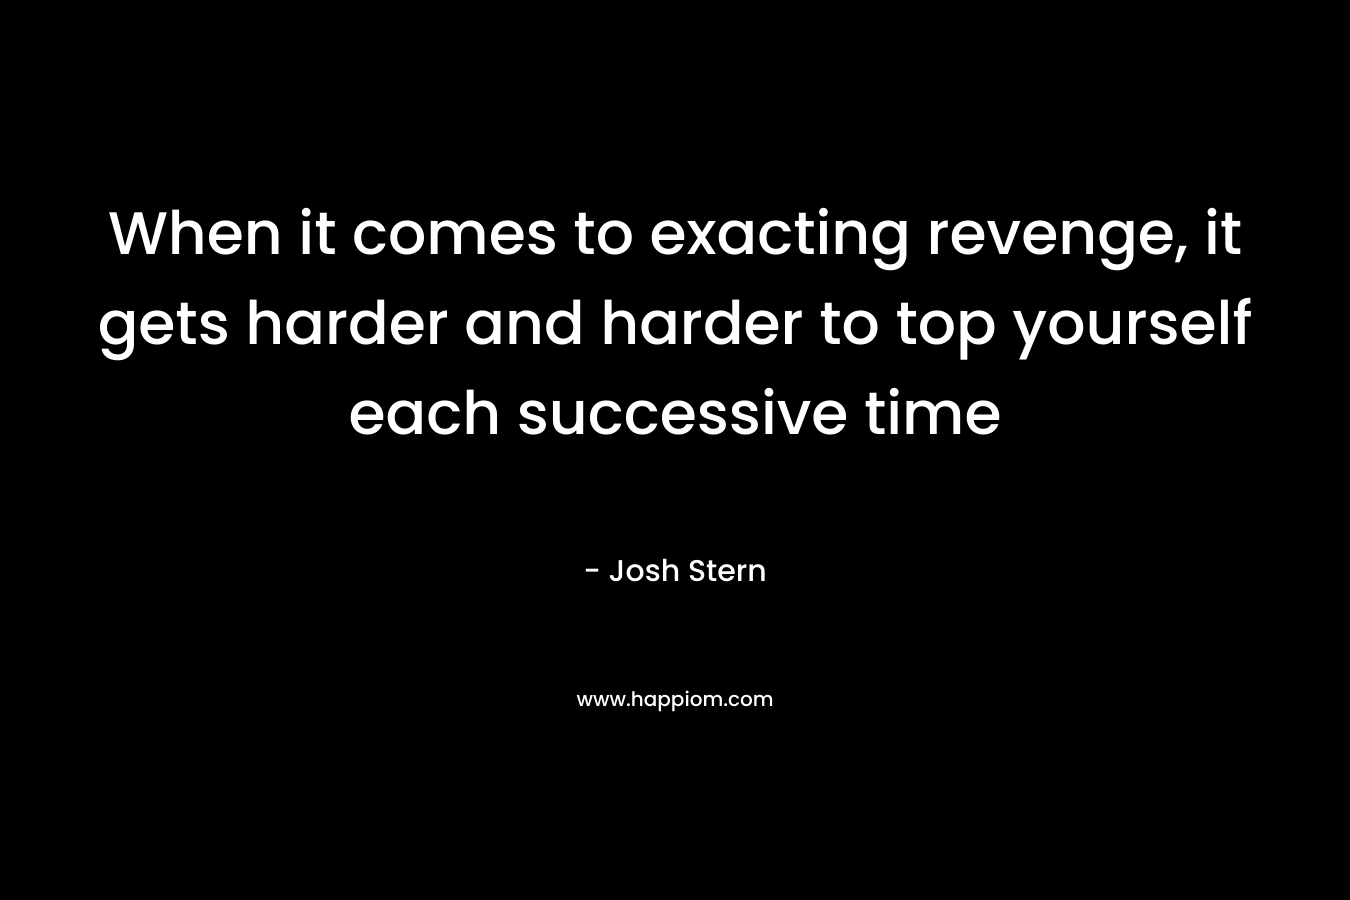 When it comes to exacting revenge, it gets harder and harder to top yourself each successive time – Josh Stern